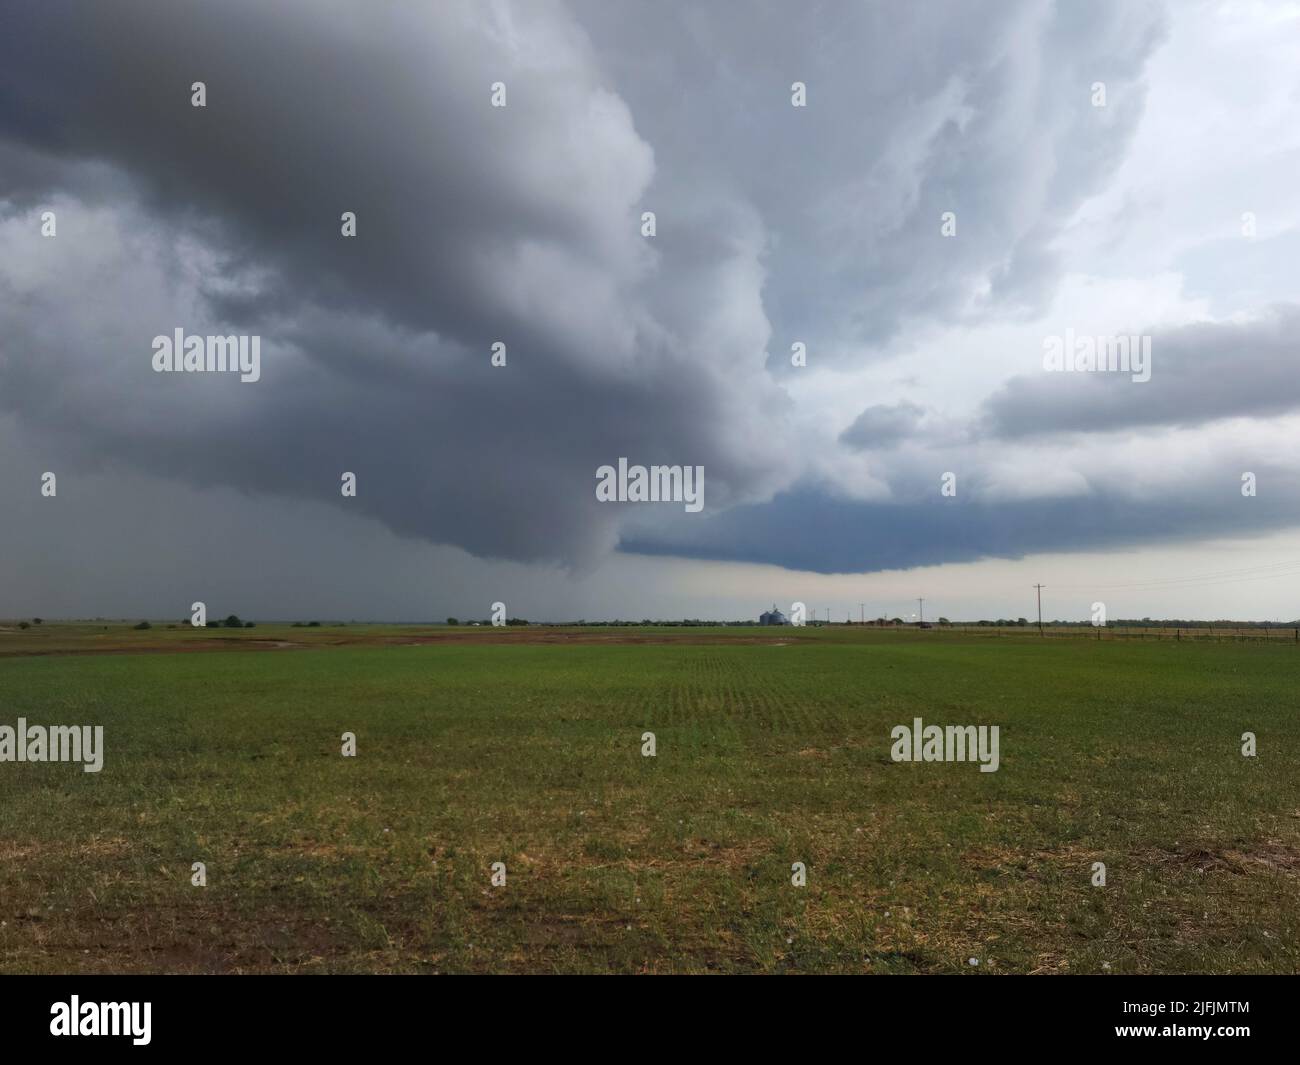 Storm clouds over an agricultural field in Oklahoma with hailstones in the foreground. Stock Photo